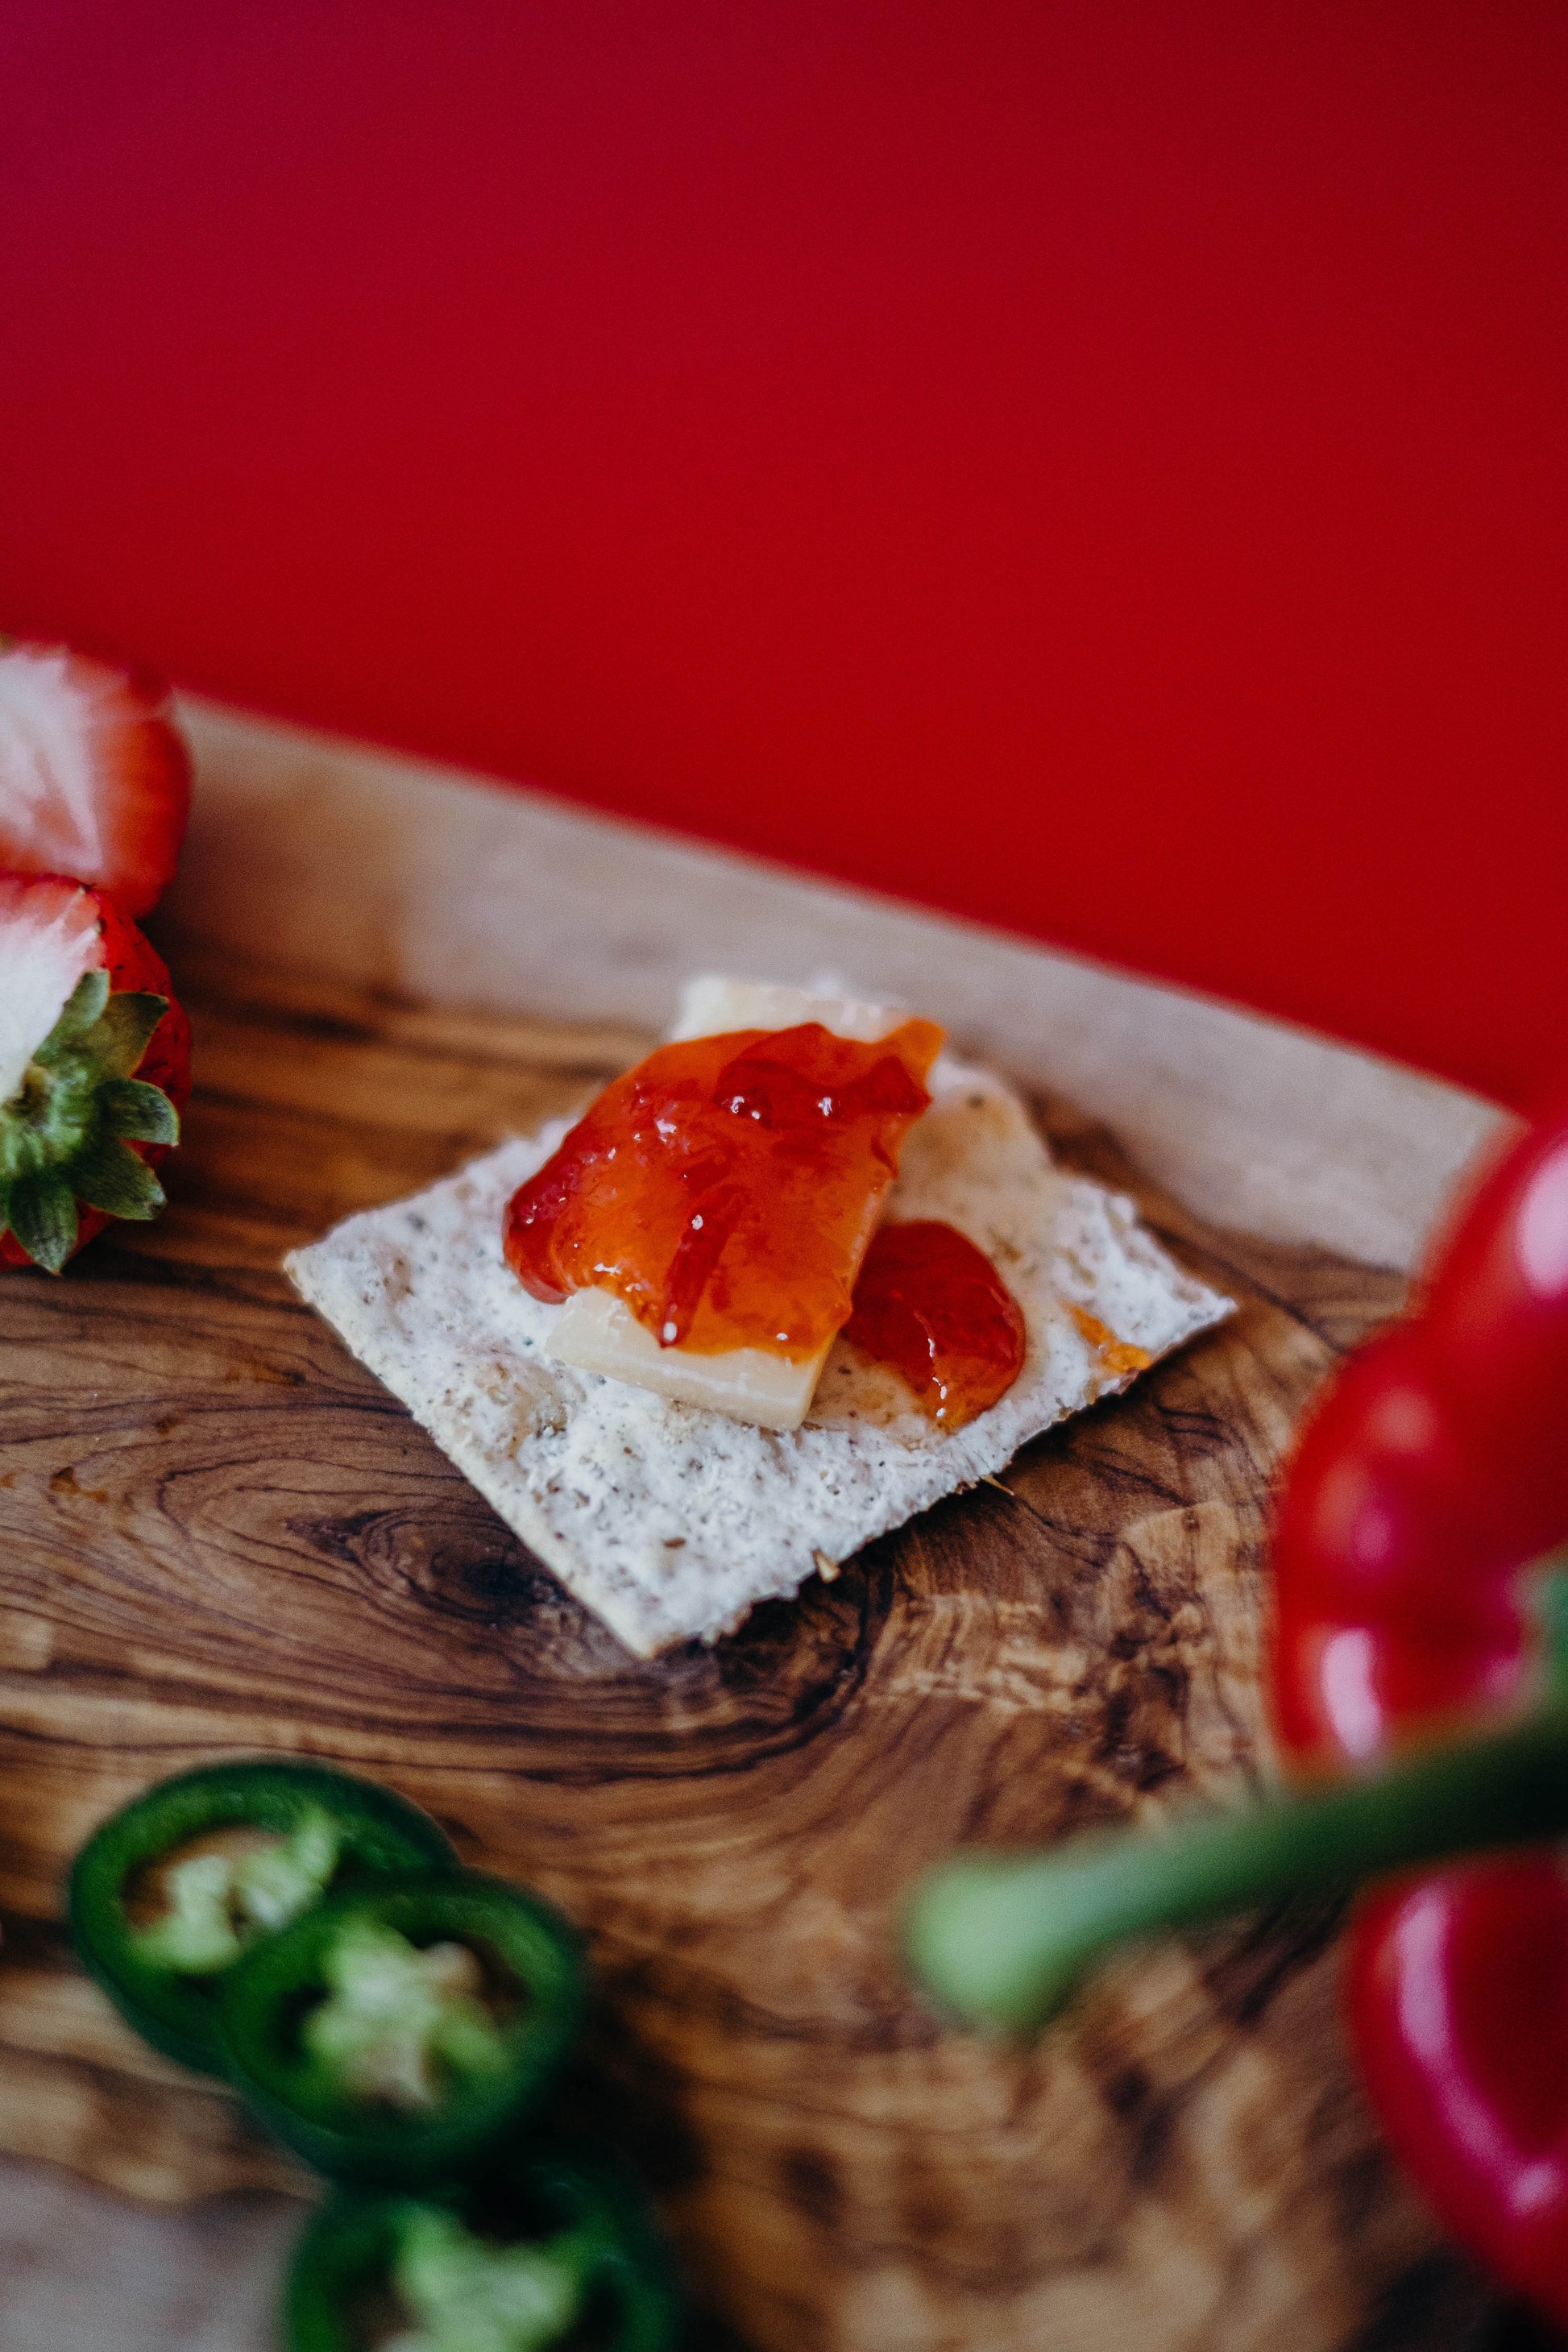 Red pepper jelly on a cracker with cheese